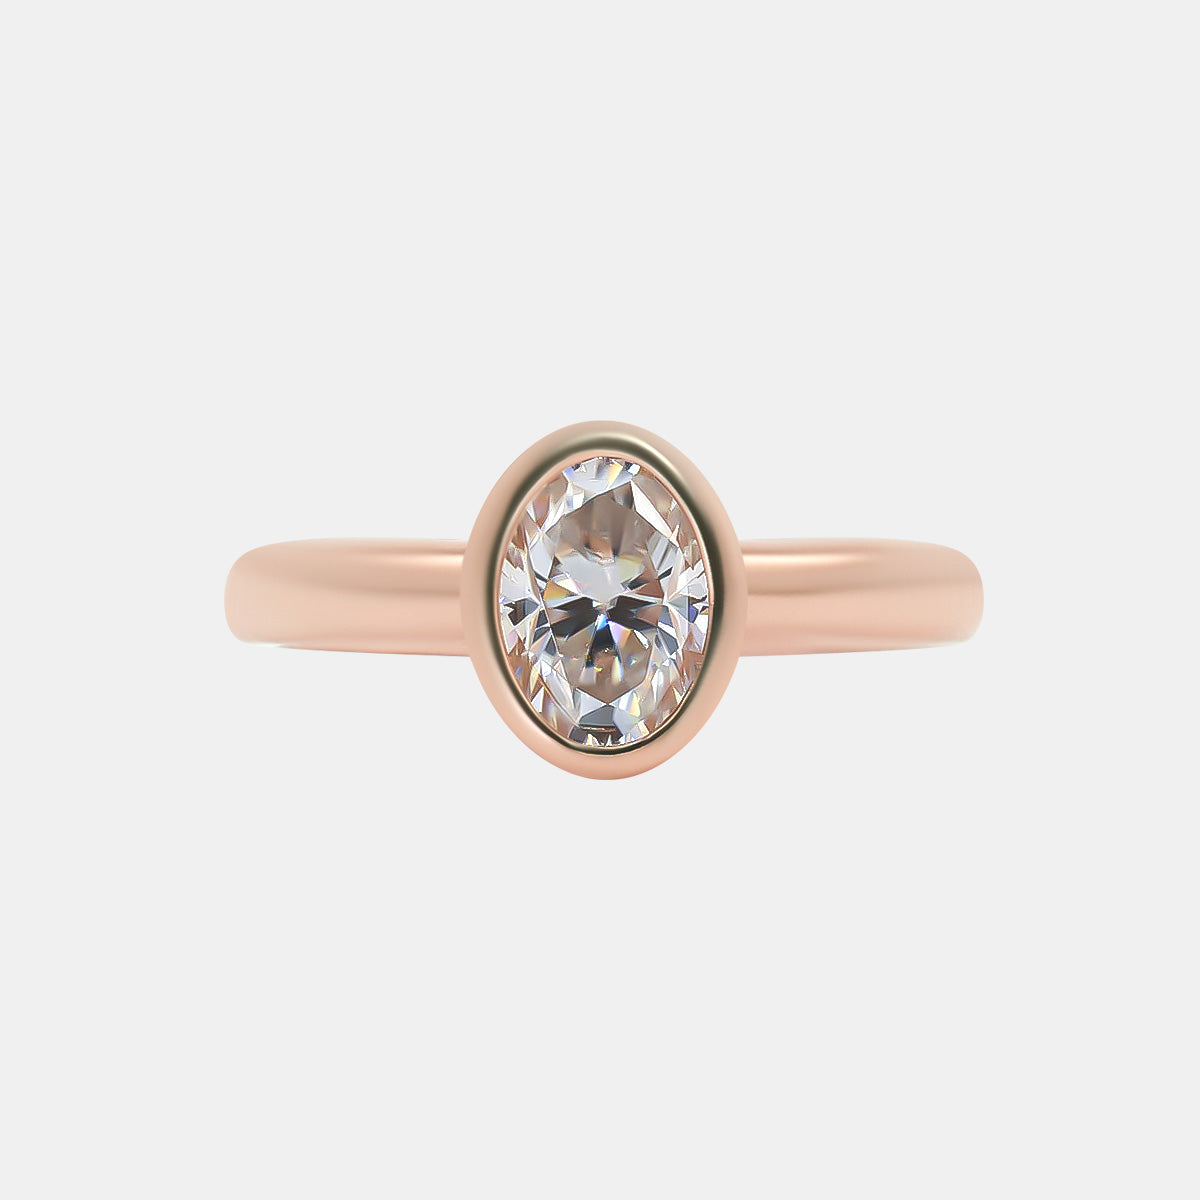 【786】“Eternal Graces” Blush Lux 1 Carat Oval Moissanite Classic Dinning Ring